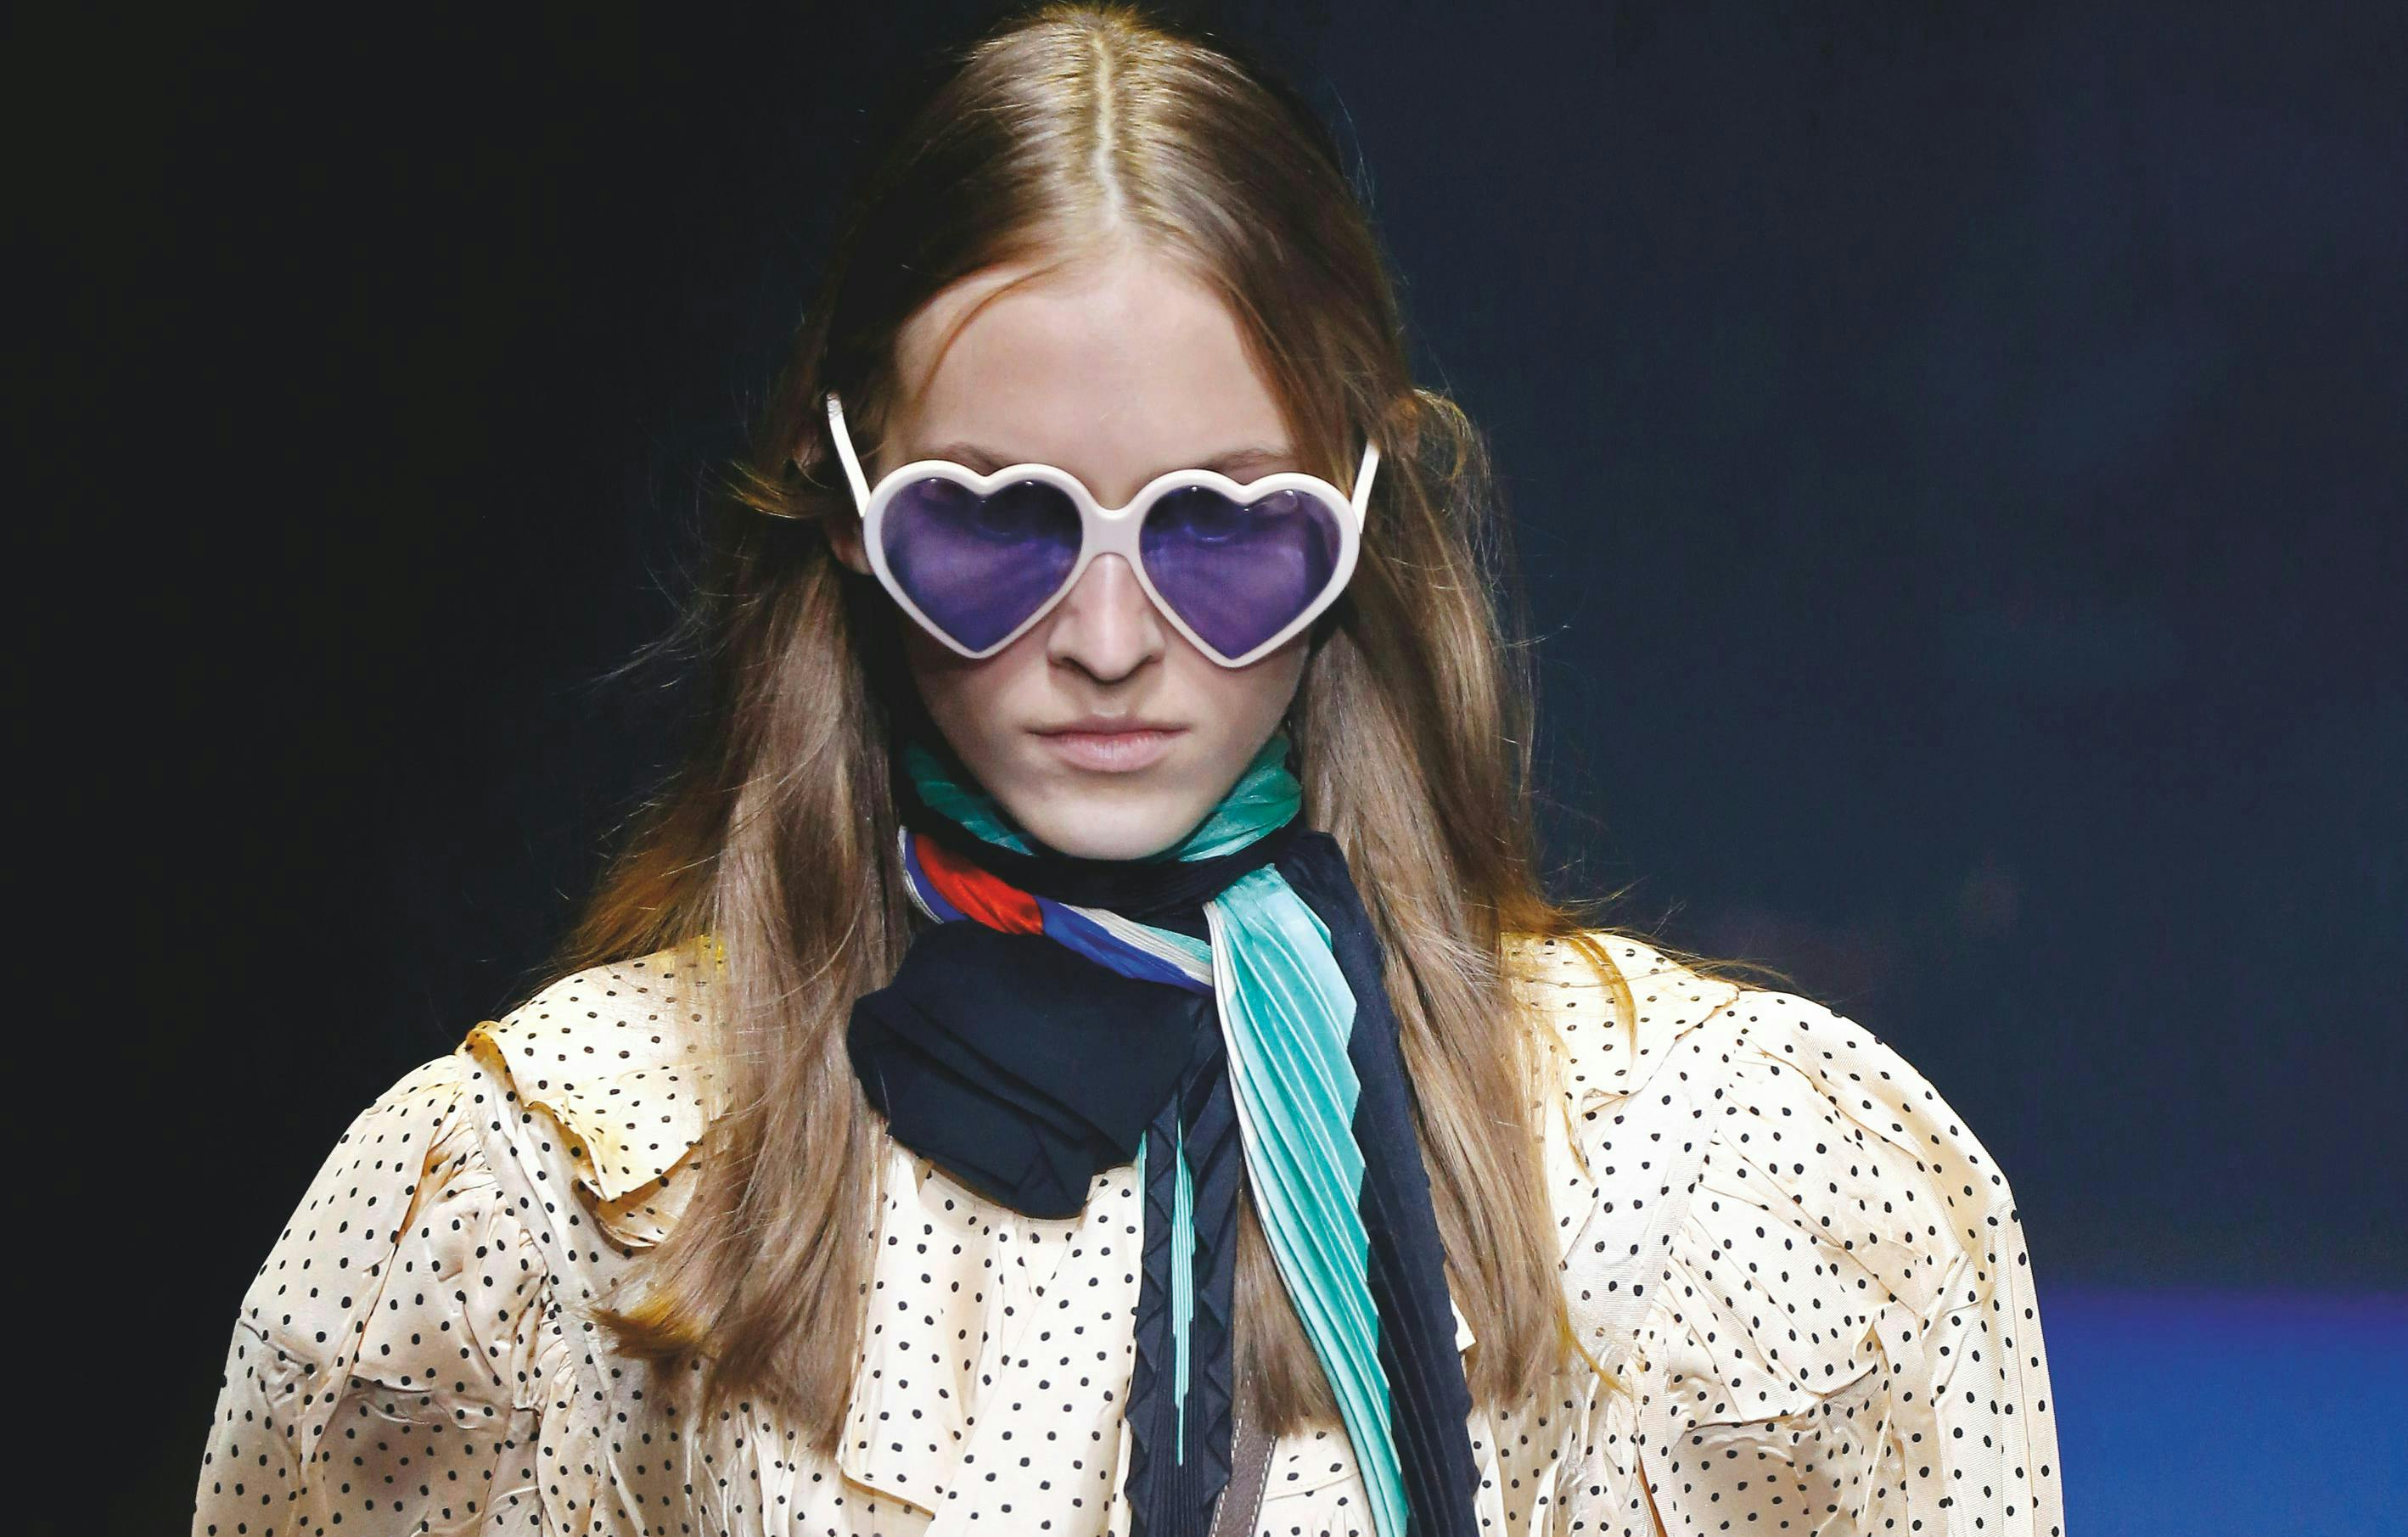 gucci ready to wear spring summer 2018 milan fashion week september2017 sunglasses accessories accessory person human clothing apparel sleeve